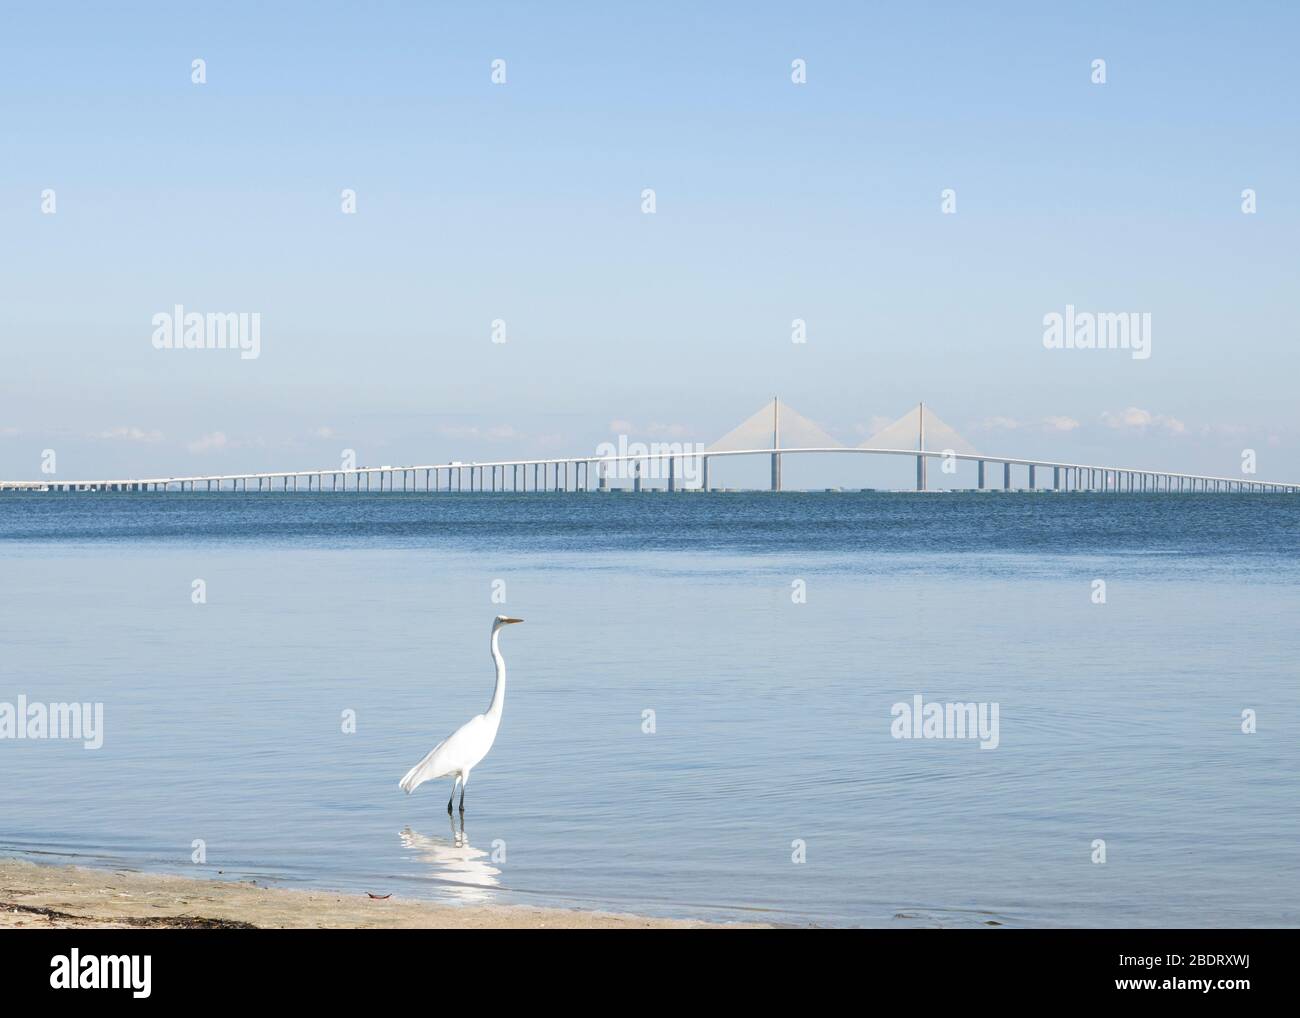 Snowy egret standing in the Tampa Bay with the Sunshine Skyway bridge in the background. Stock Photo